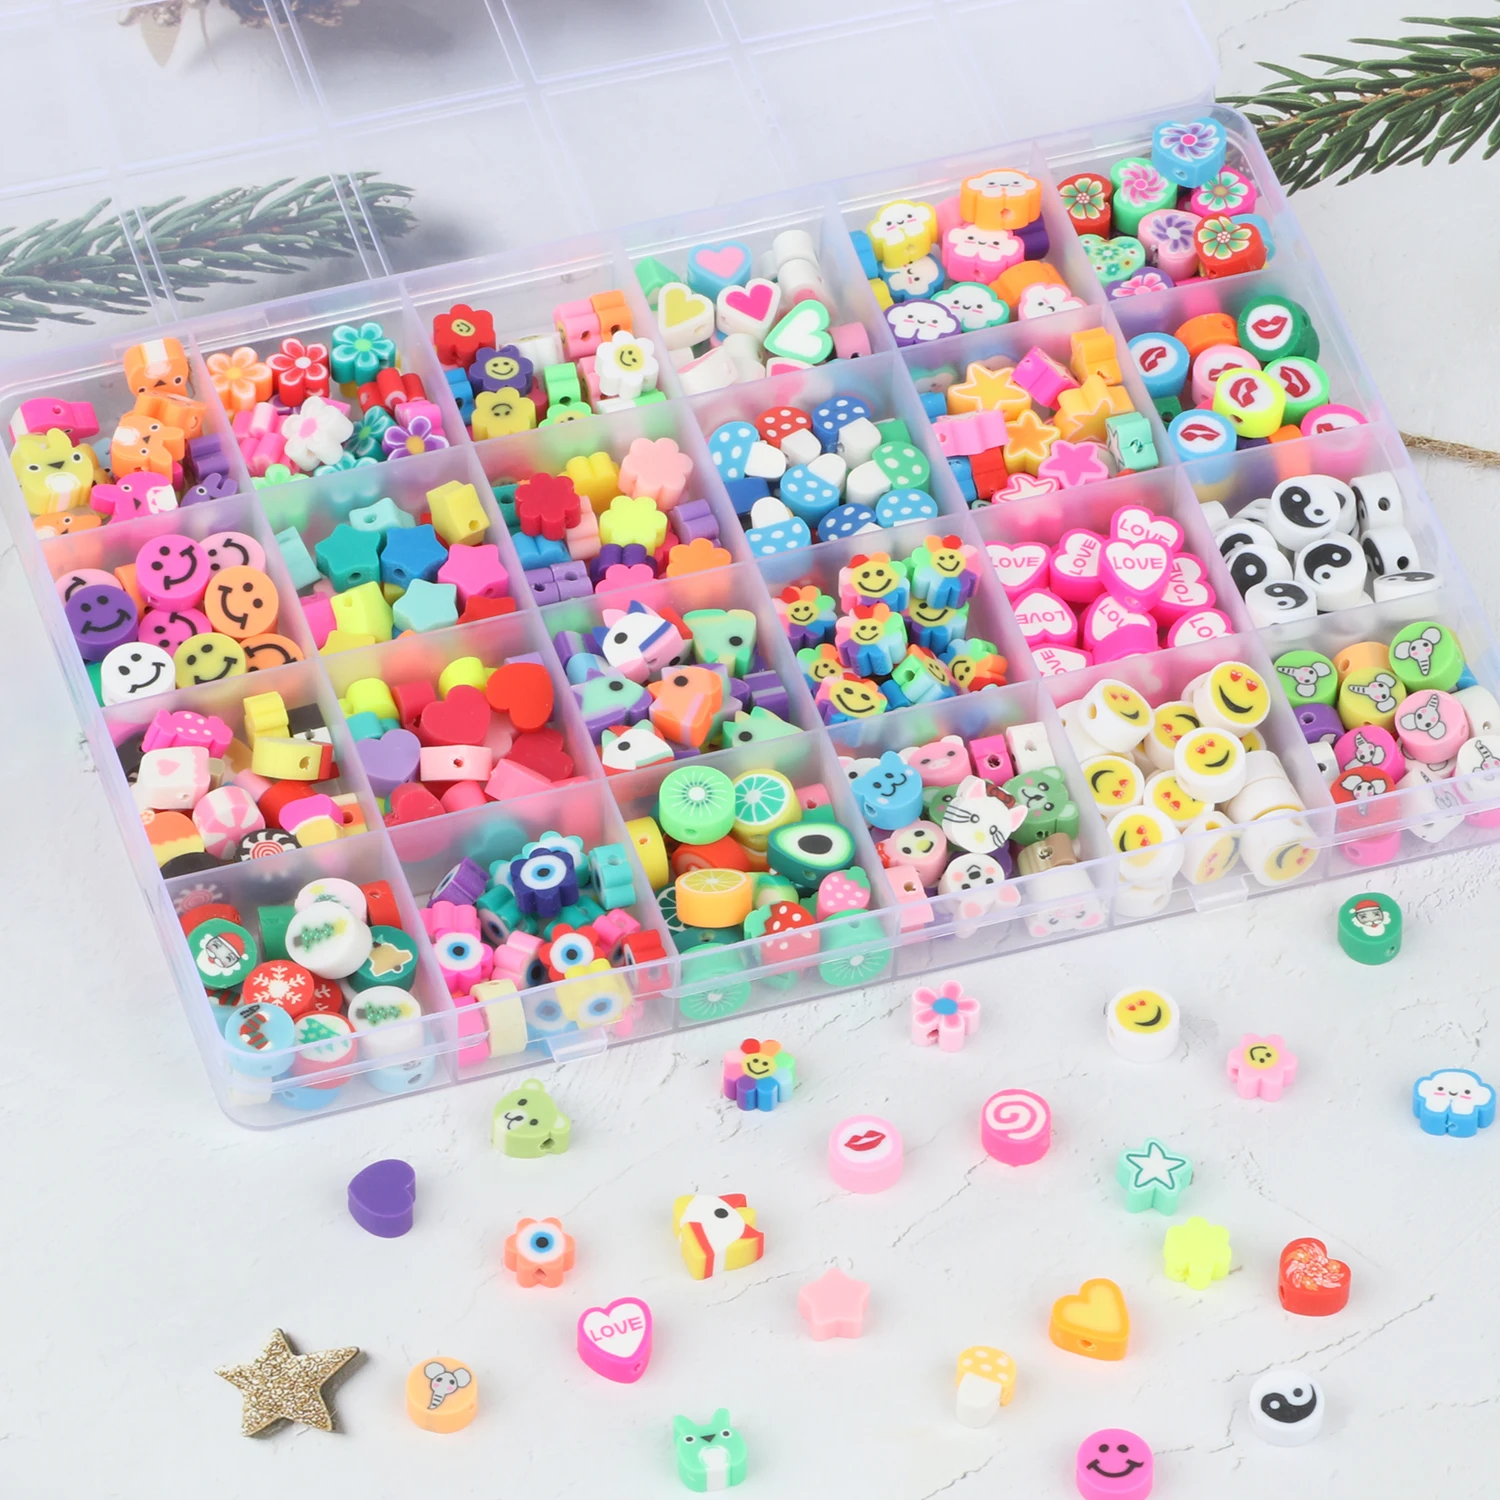 45 Style Mix Polymer Clay Acrylic Jewelry Making Kits Soft Pottery Spacer ​Beads For Kids Girls Bracelet Necklace DIY Kits Sets